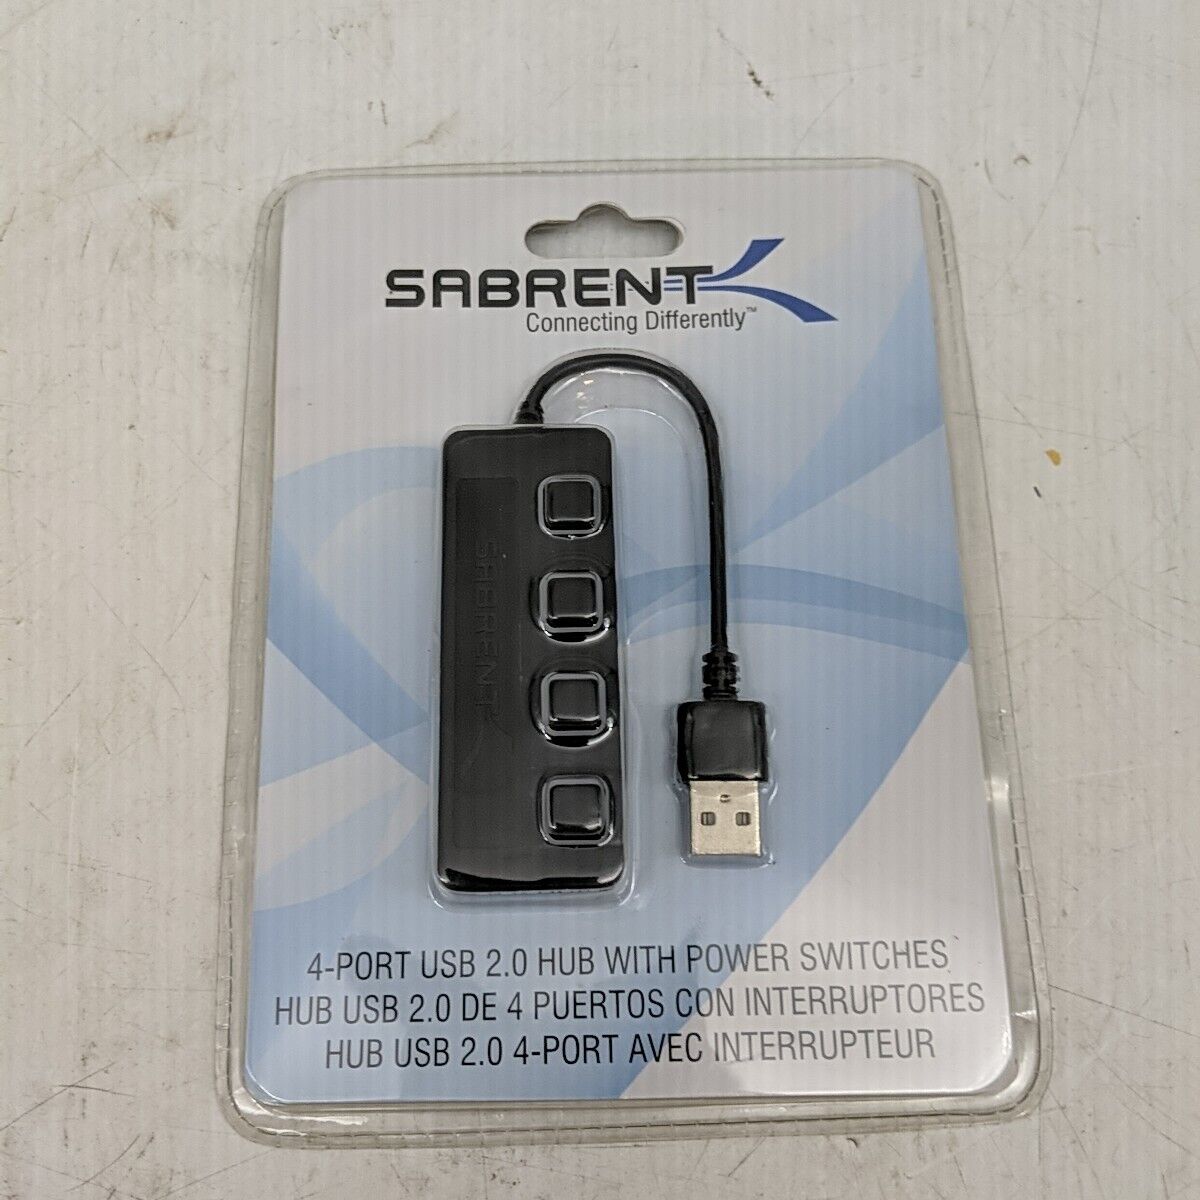 4-Port USB 2.0 Hub Switch With Power Switches Black Sabrent HB-UMLS 